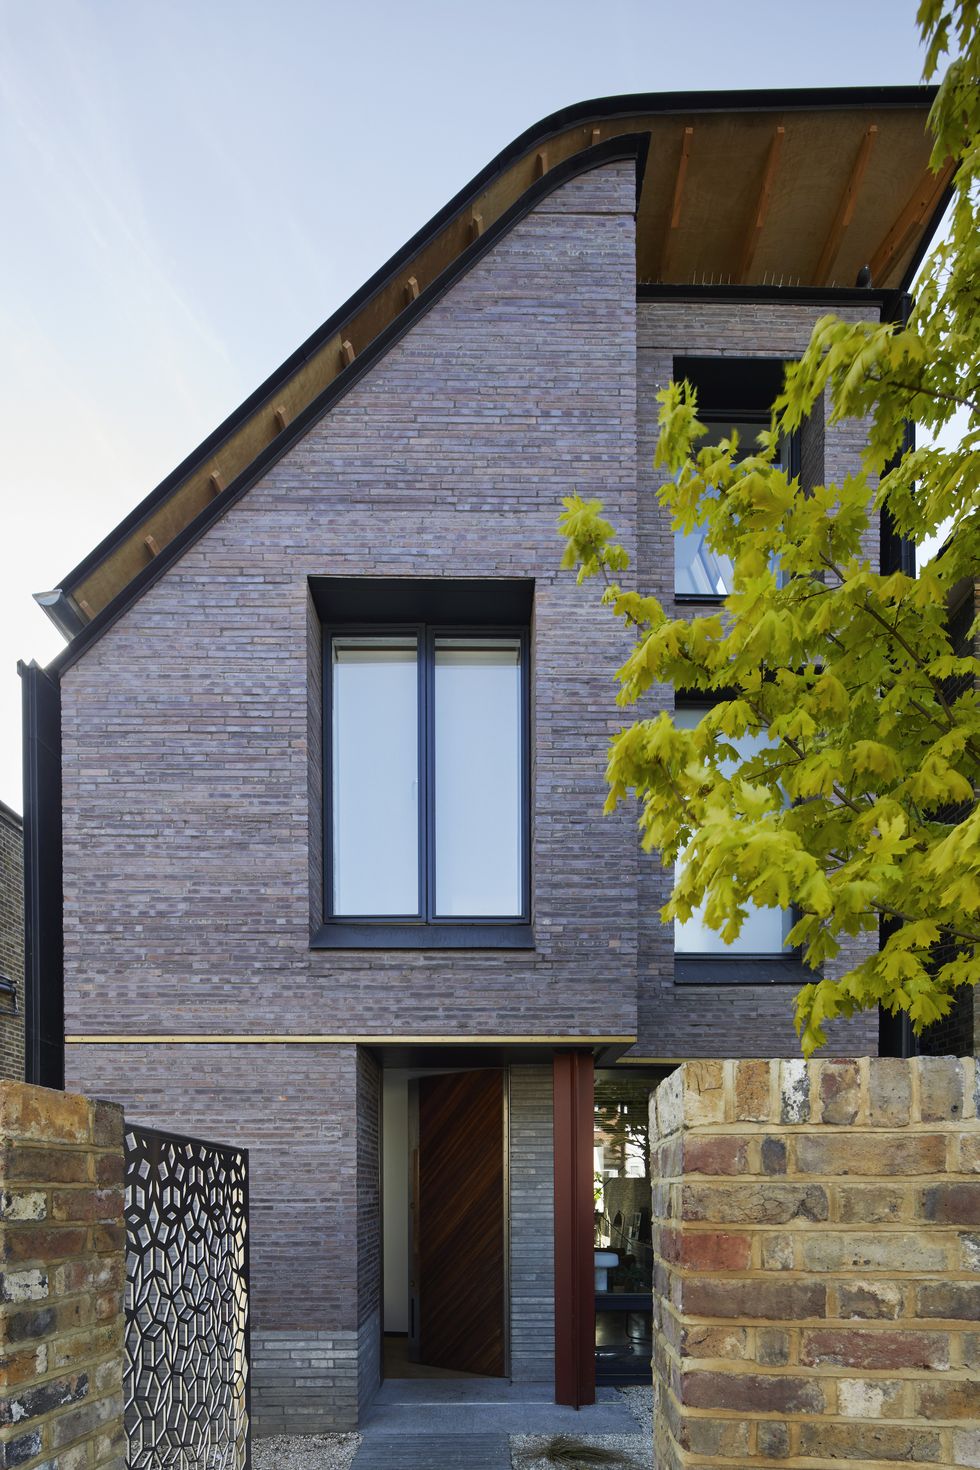 The Makers House by Liddicoat & Goldhill - RIBA House of the Year 2018 longlist 